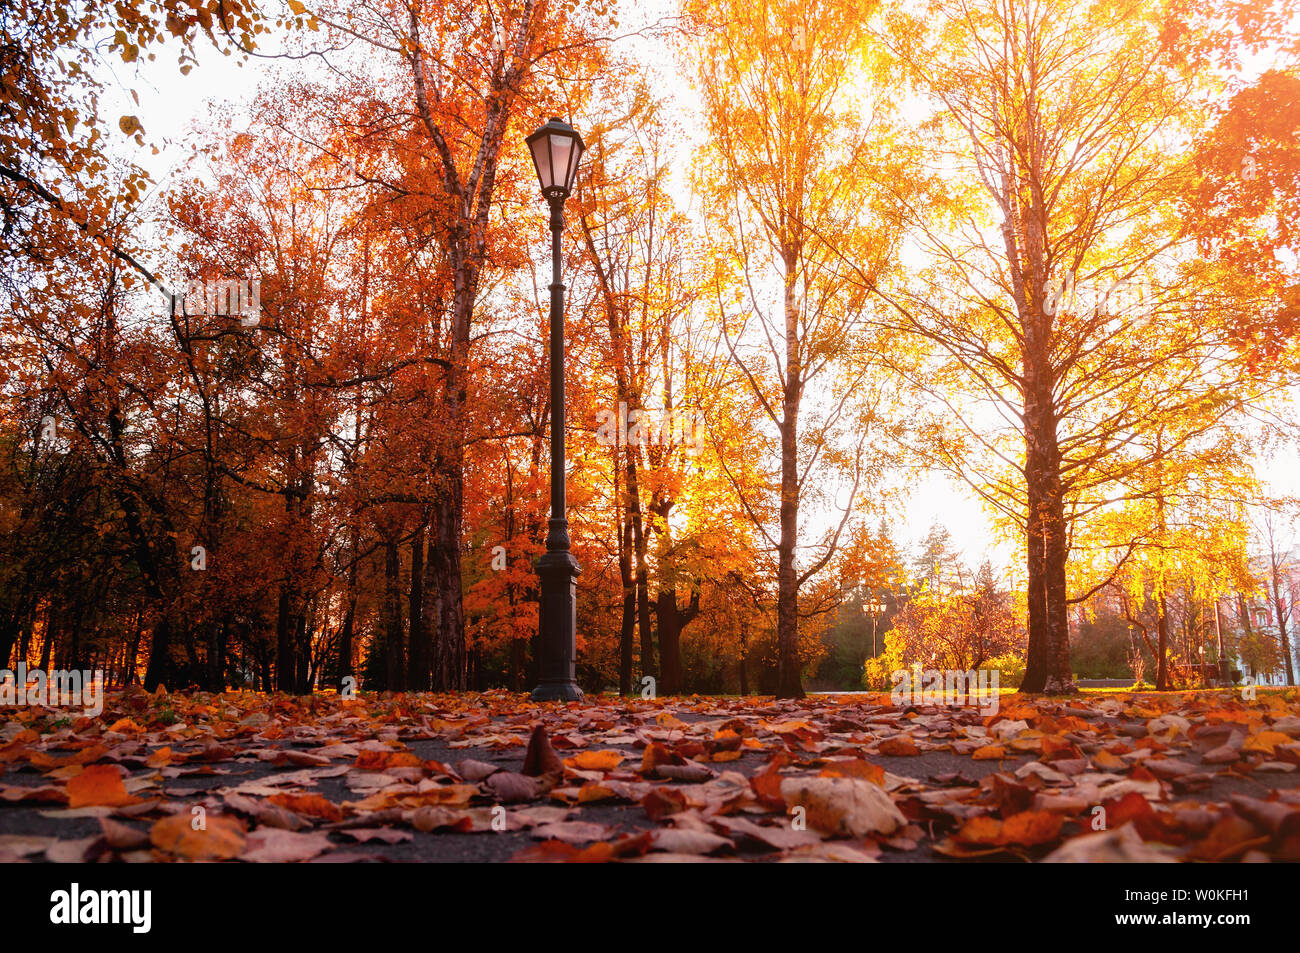 Autumn city landscape. Autumn trees in sunny fall park lit by sunshine and fallen maple leaves on the foreground. Autumn city park scene Stock Photo